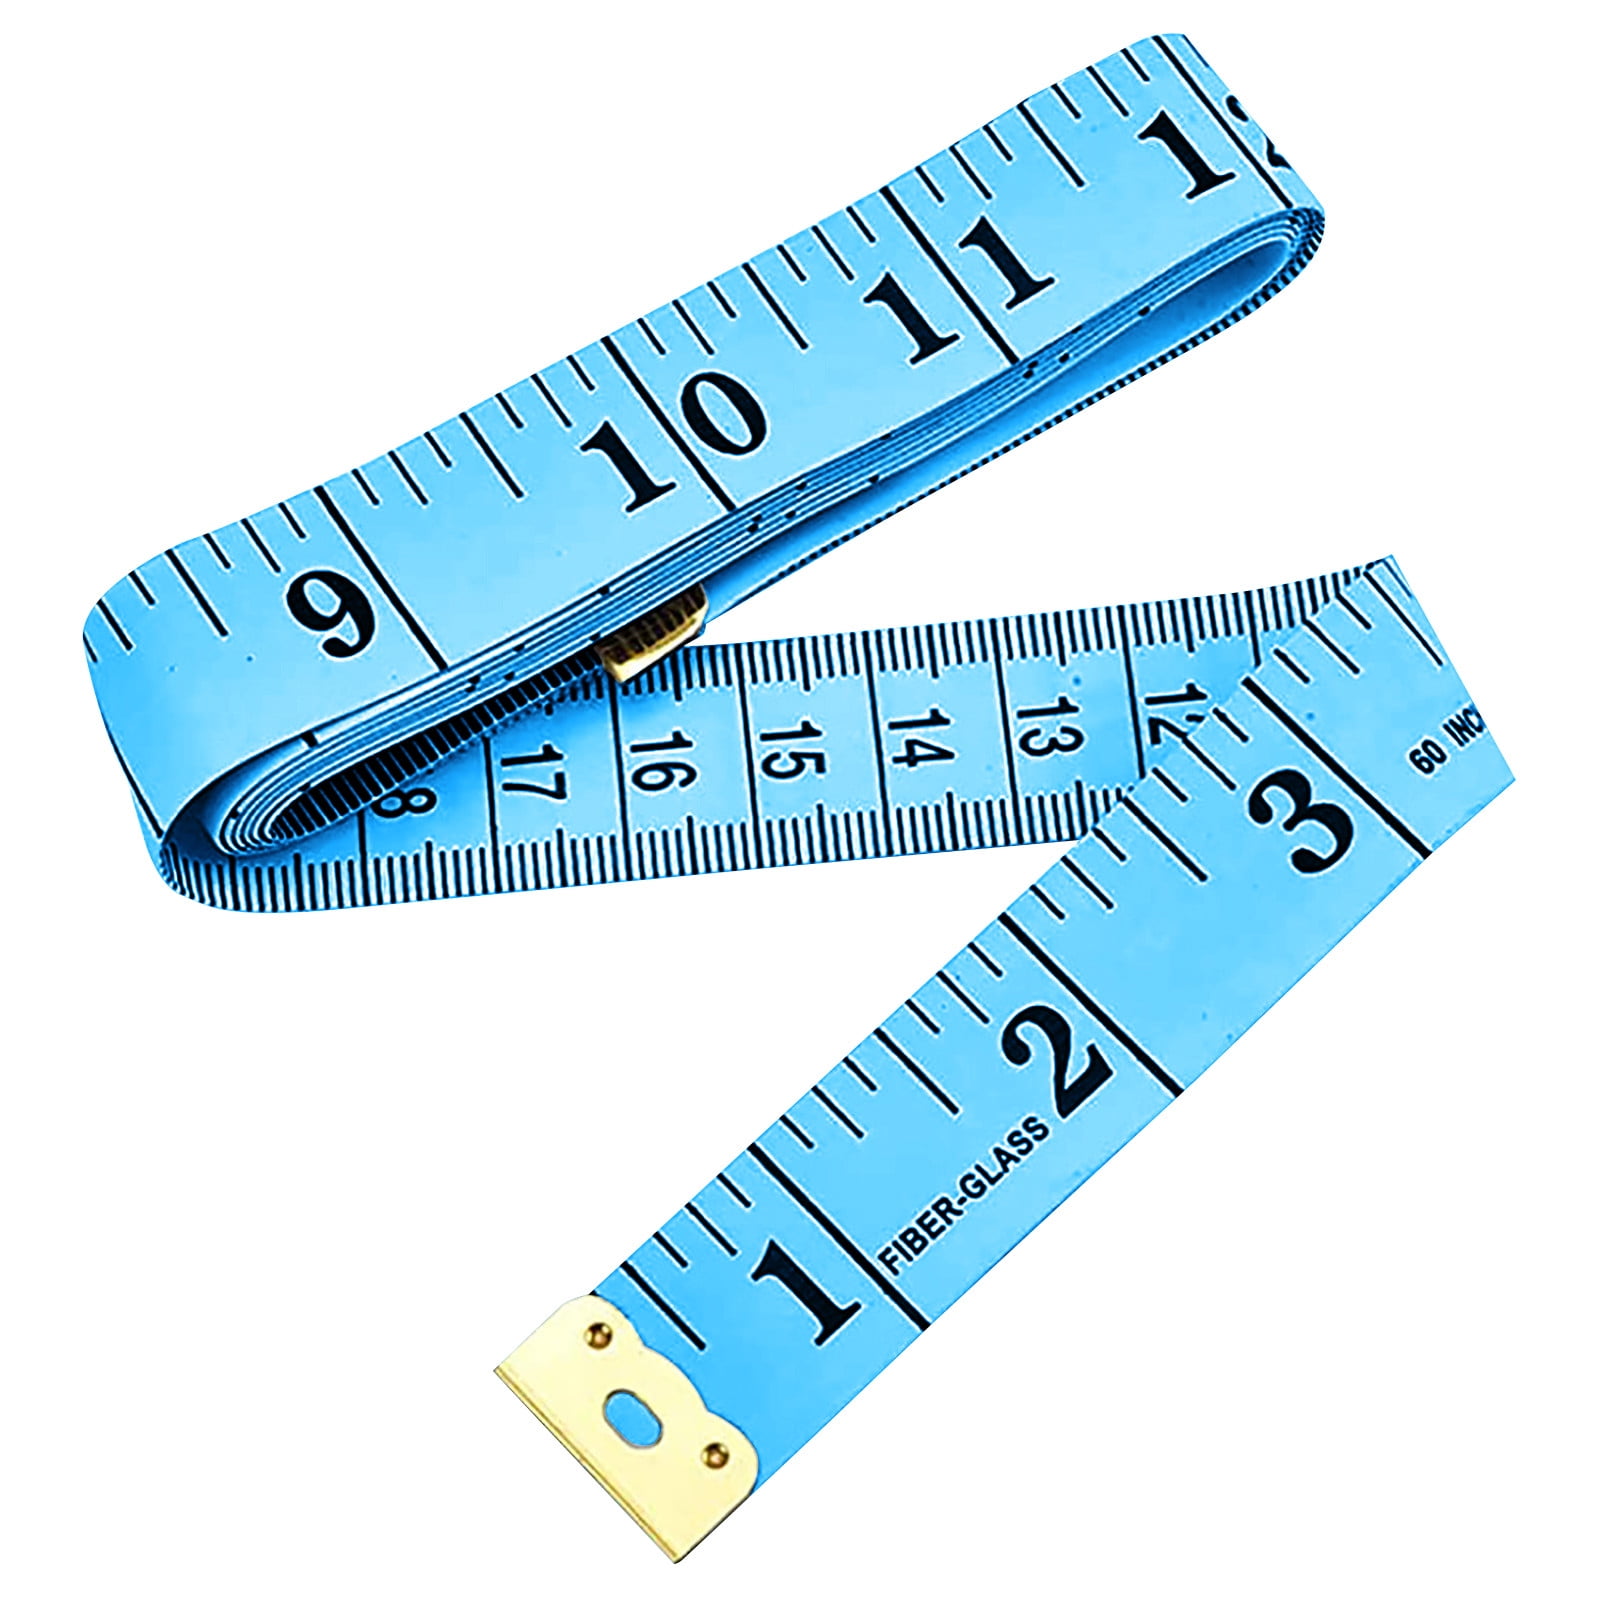 Ultima 3pc Double Scale Soft Tape Measure Set for Sewing, Quilting,  Tailoring, Body Measurement & More